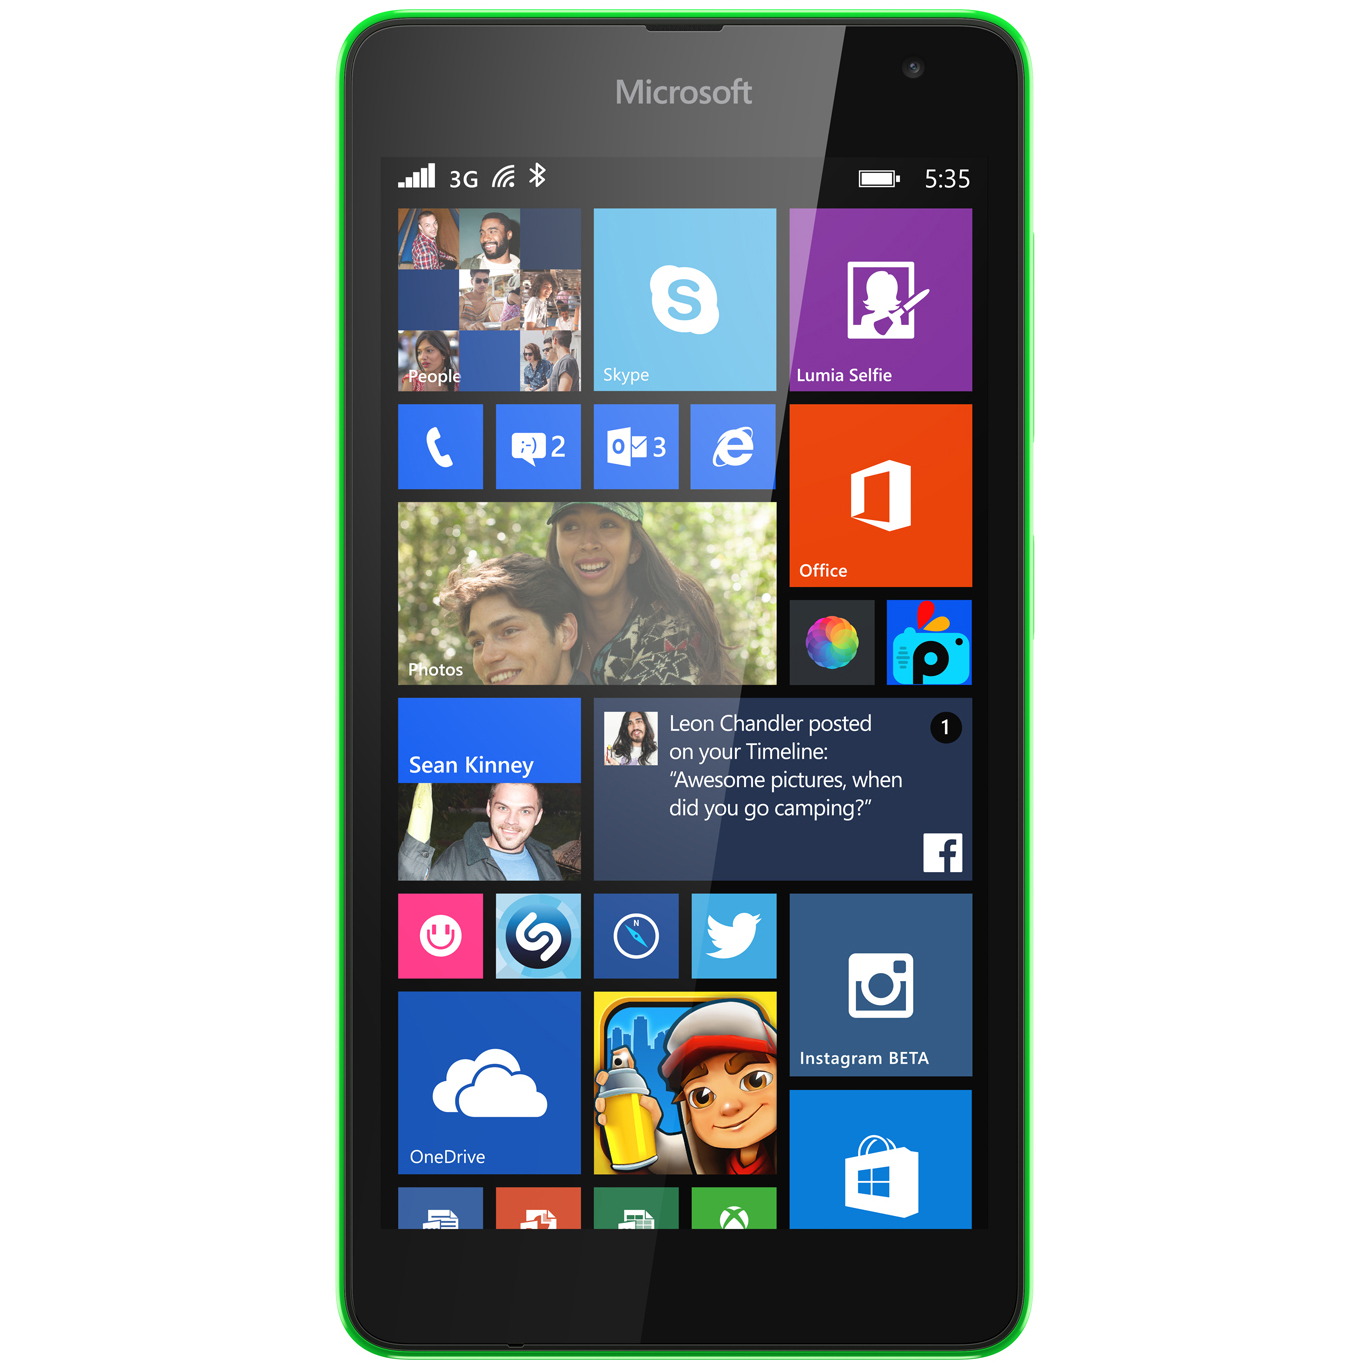 Microsoft Lumia 535 receives new OS and firmware update, likely